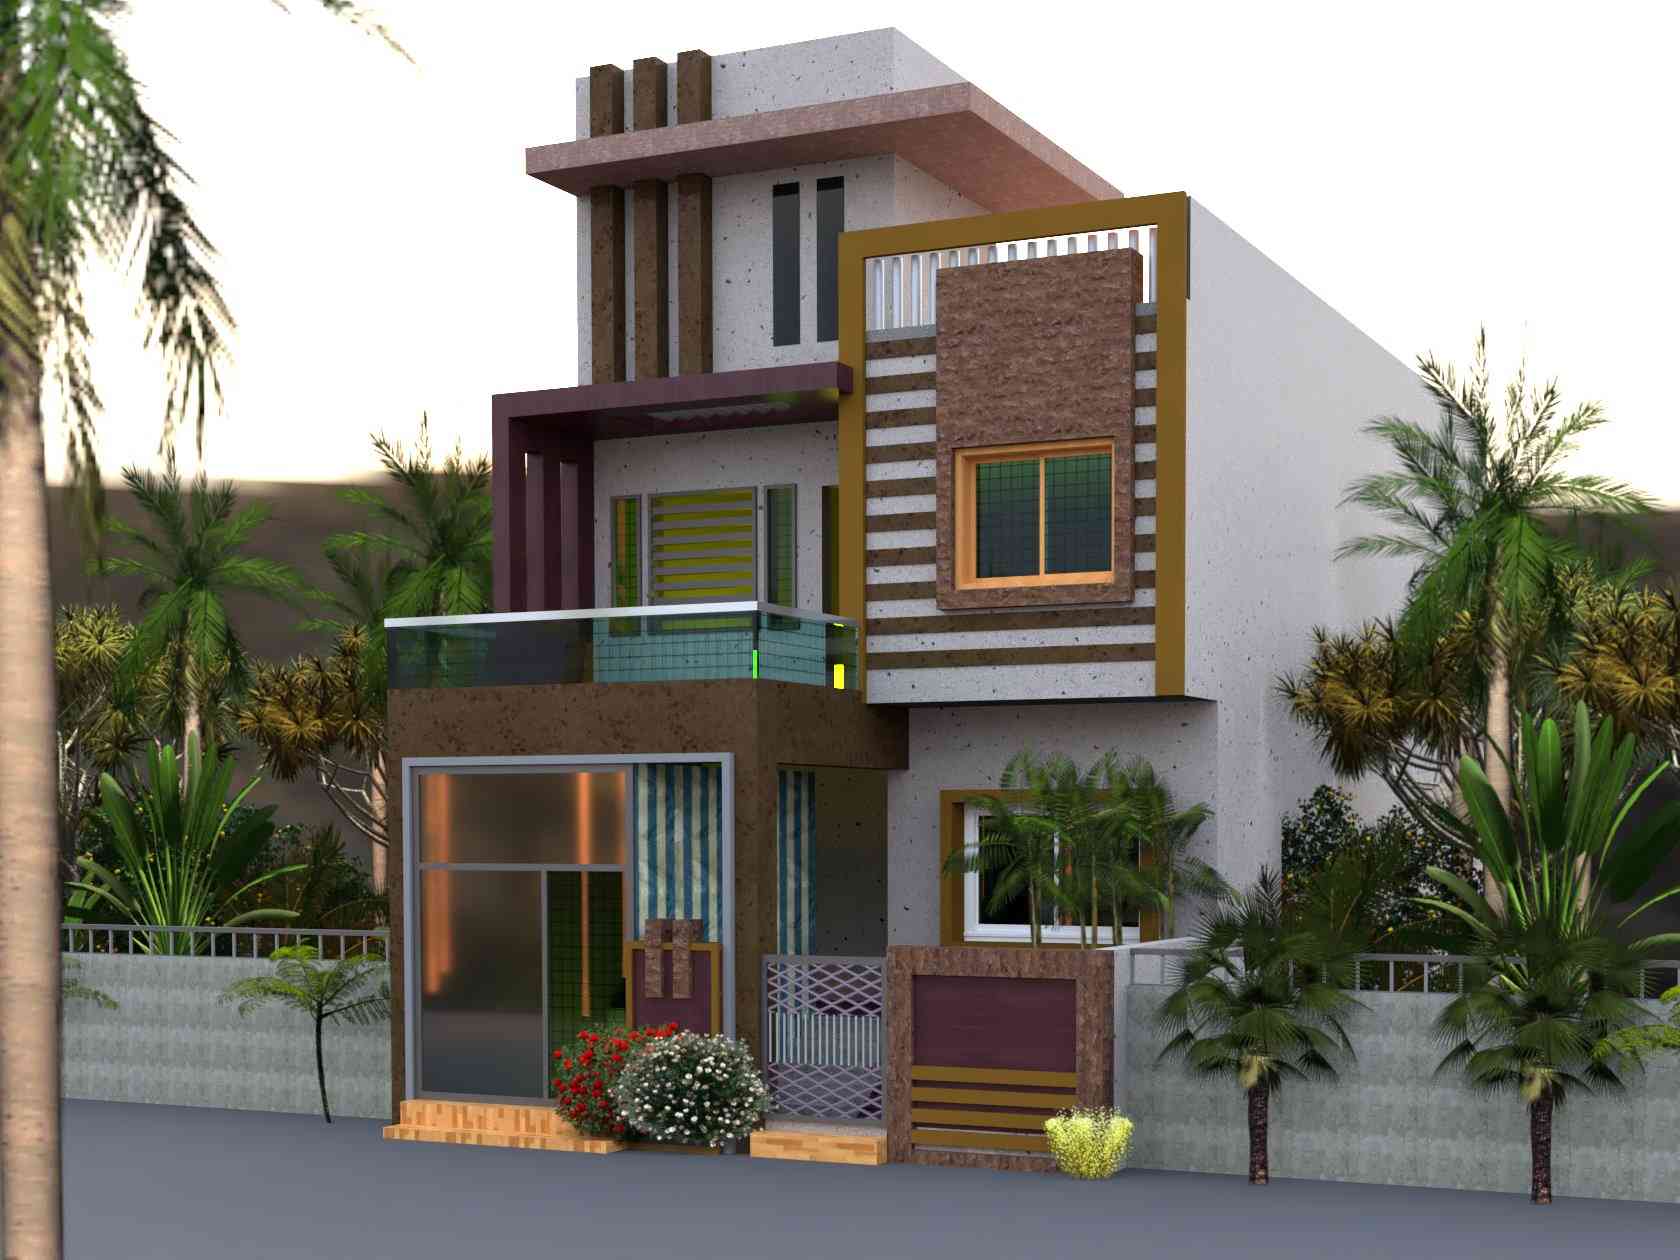 Residential House Front Elevation Design